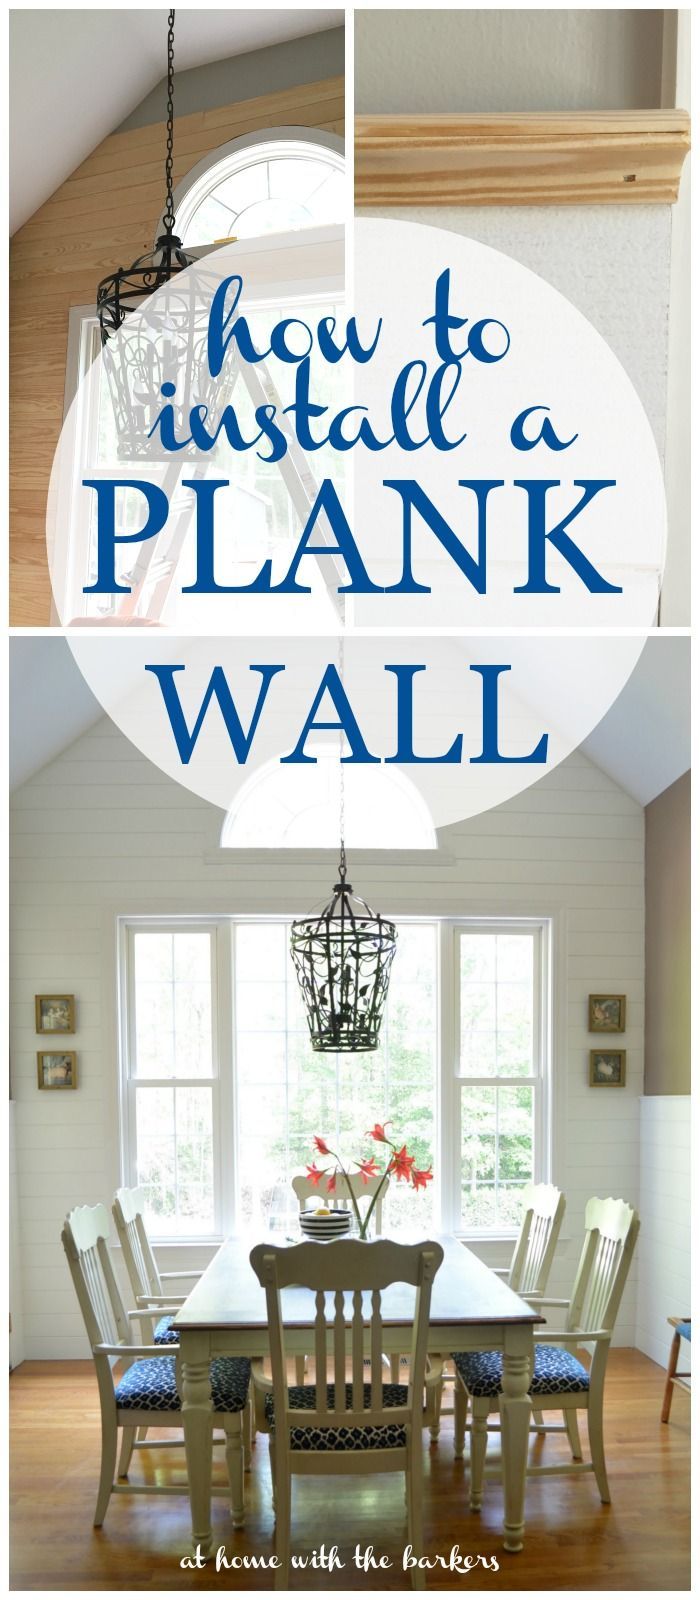 How to Install a Plank Wall